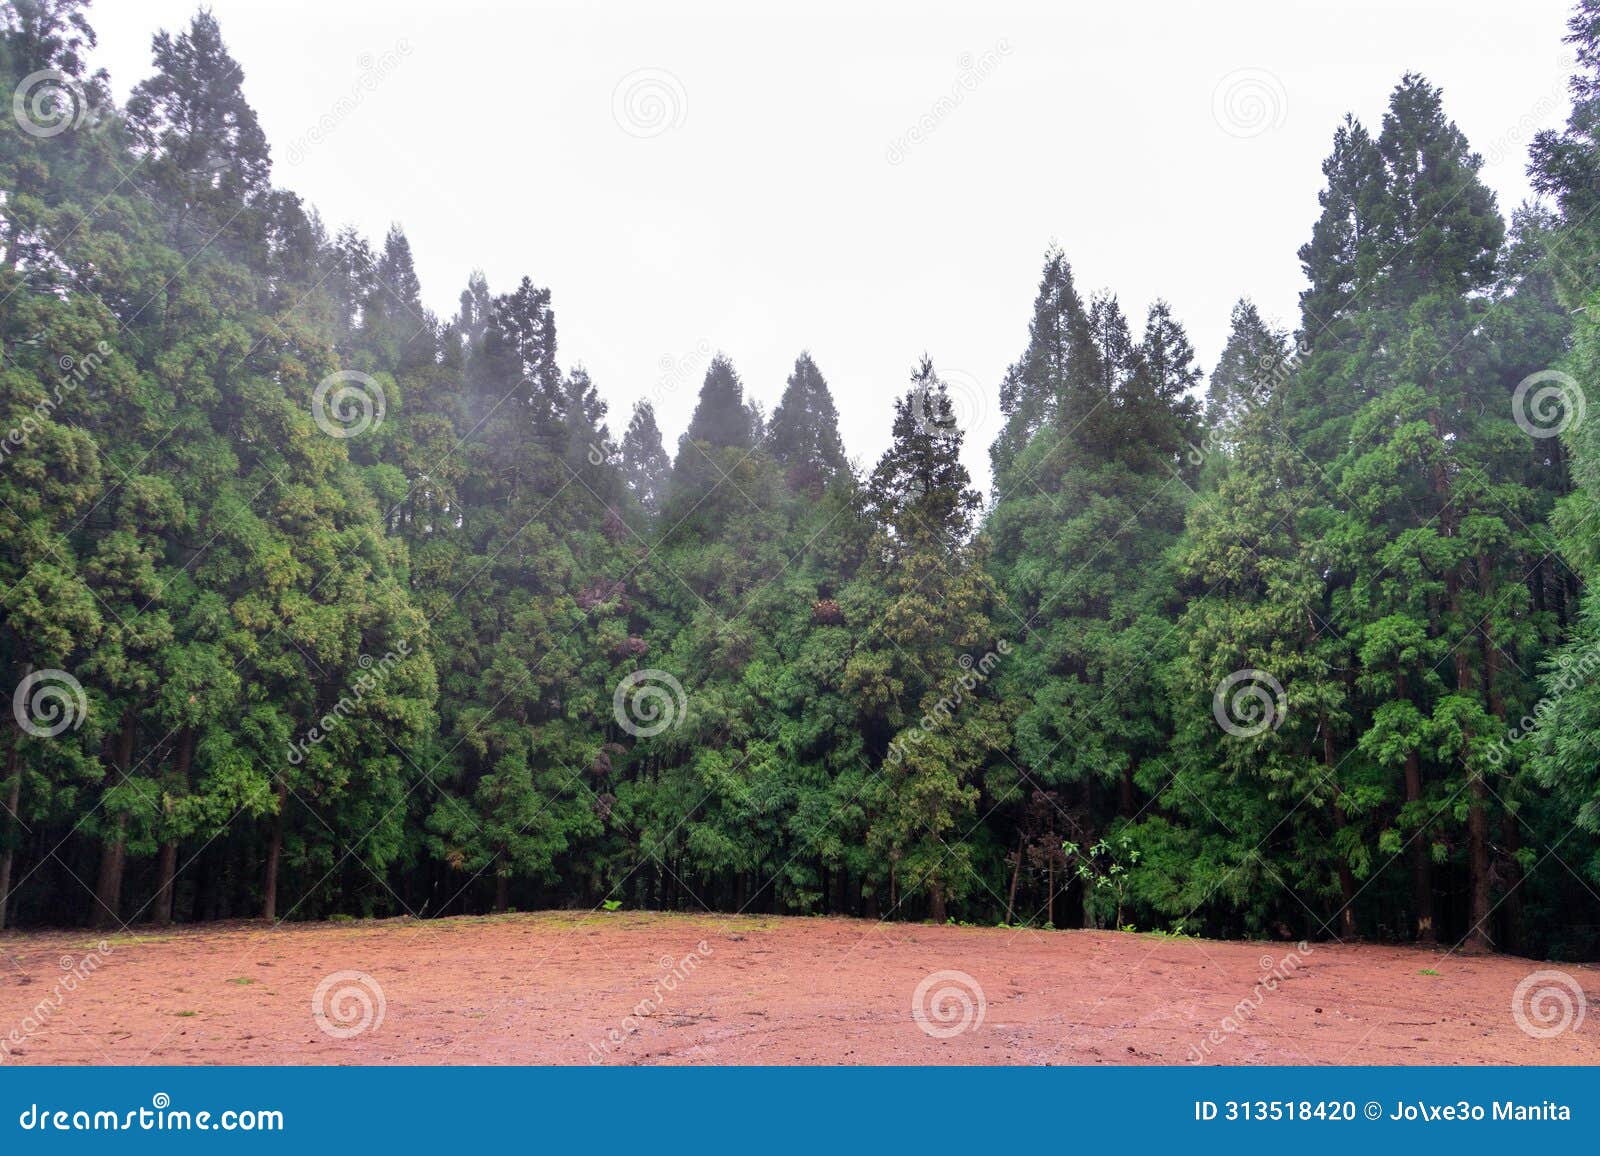 traditional azorean trees stand tall in the misty rain.